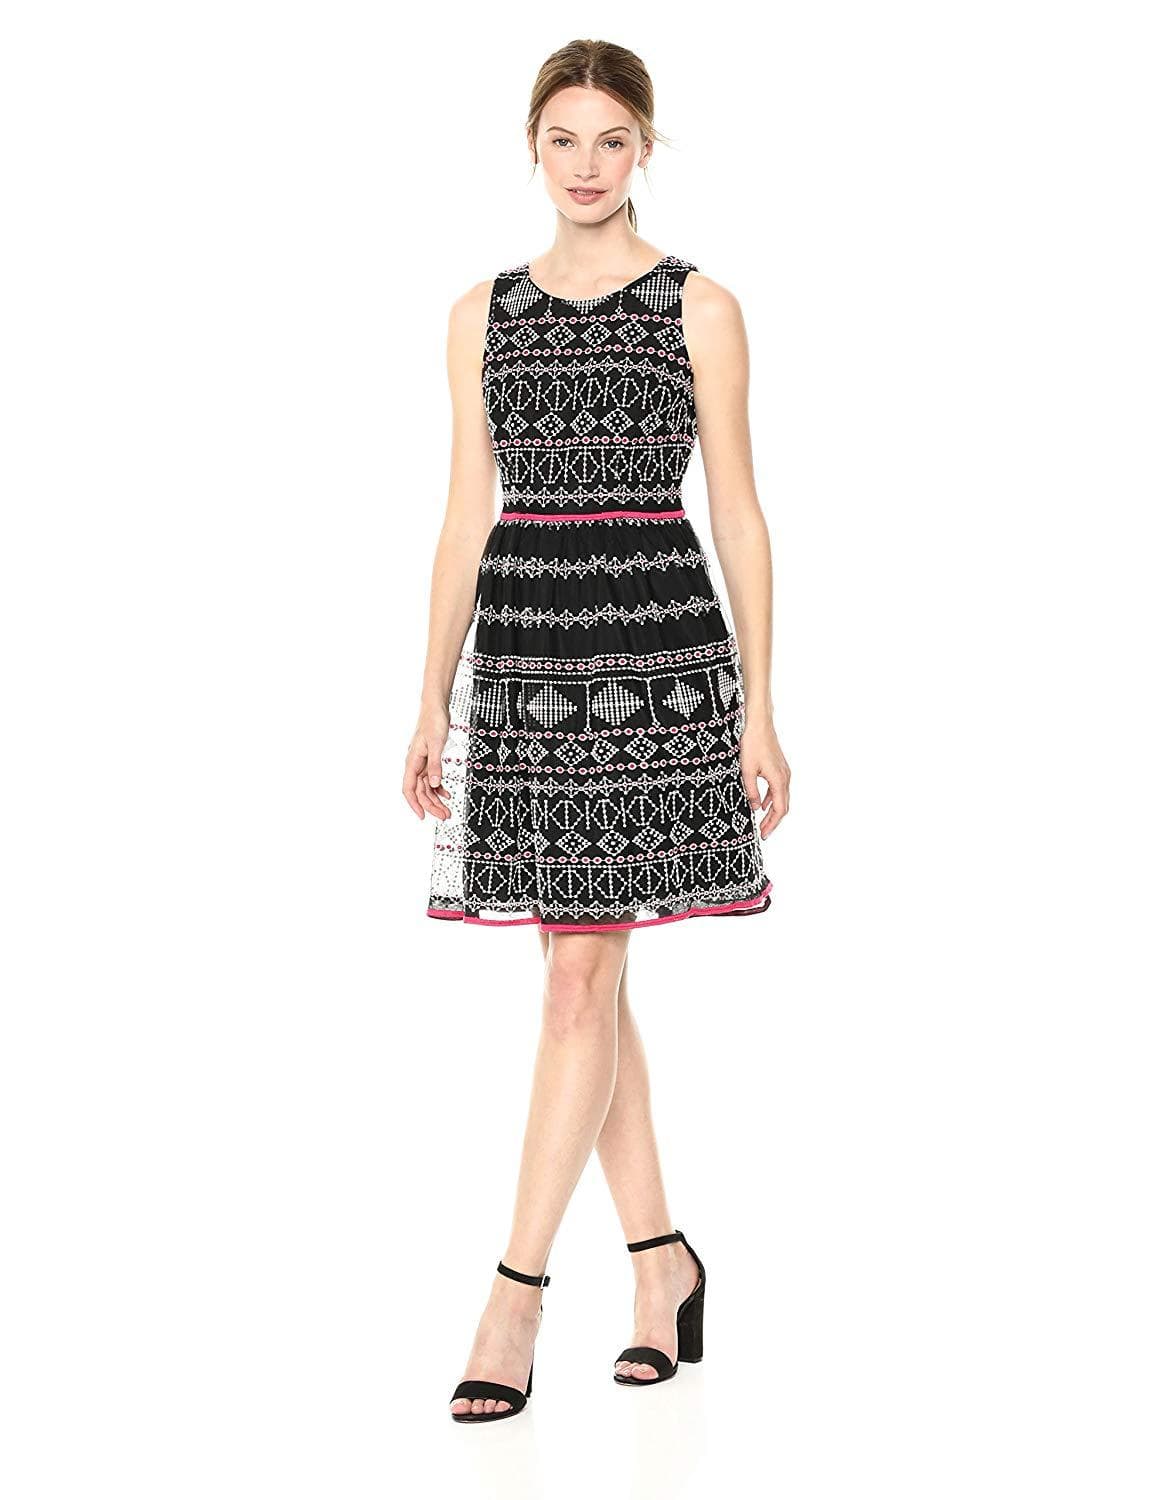 Taylor - 9722M Sleeveless Piped Multi-Print A-Line Dress
